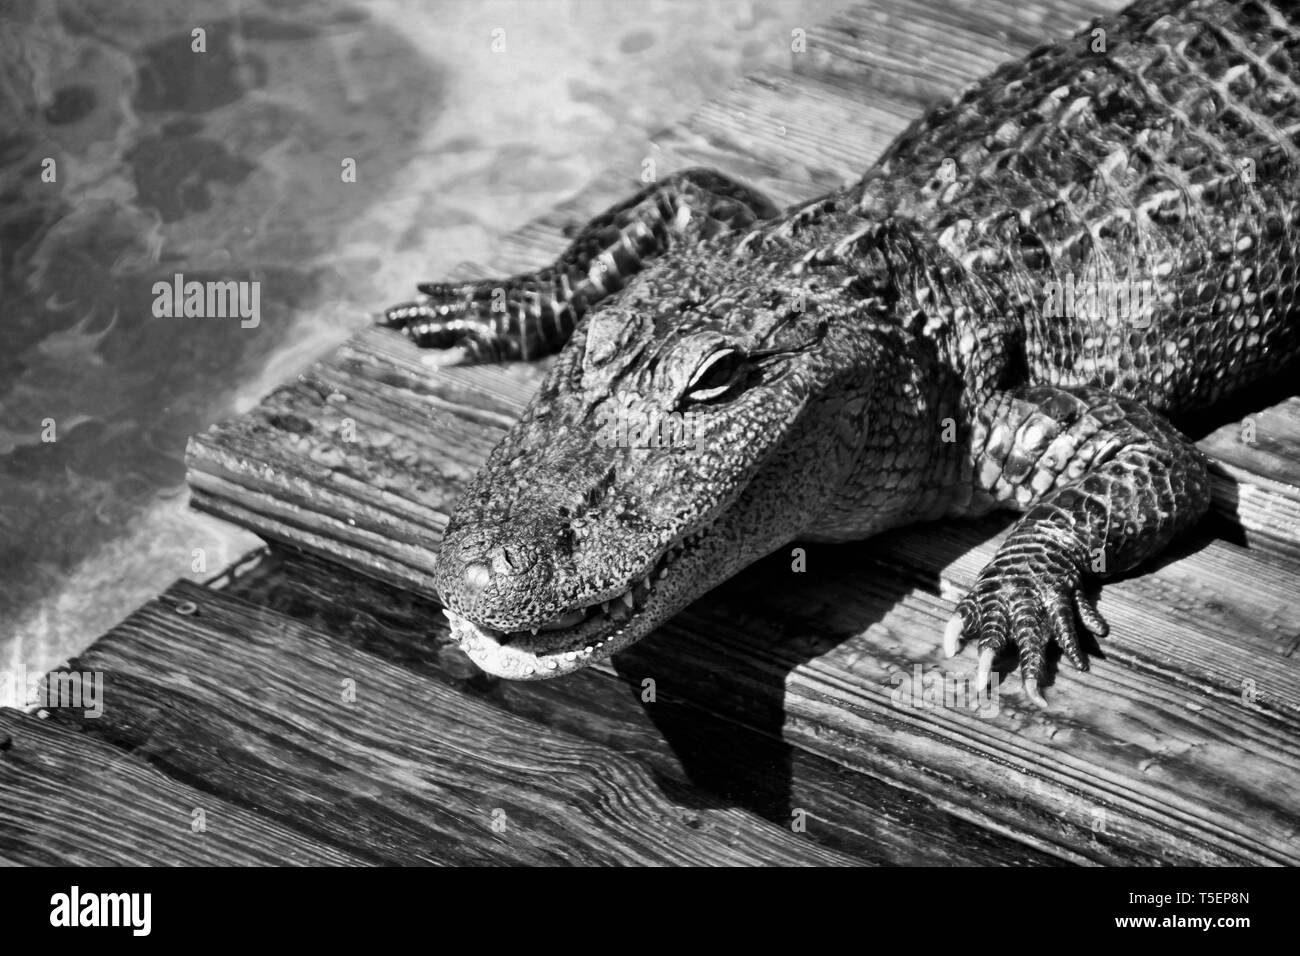 A close up of an Alligator in Florida Stock Photo